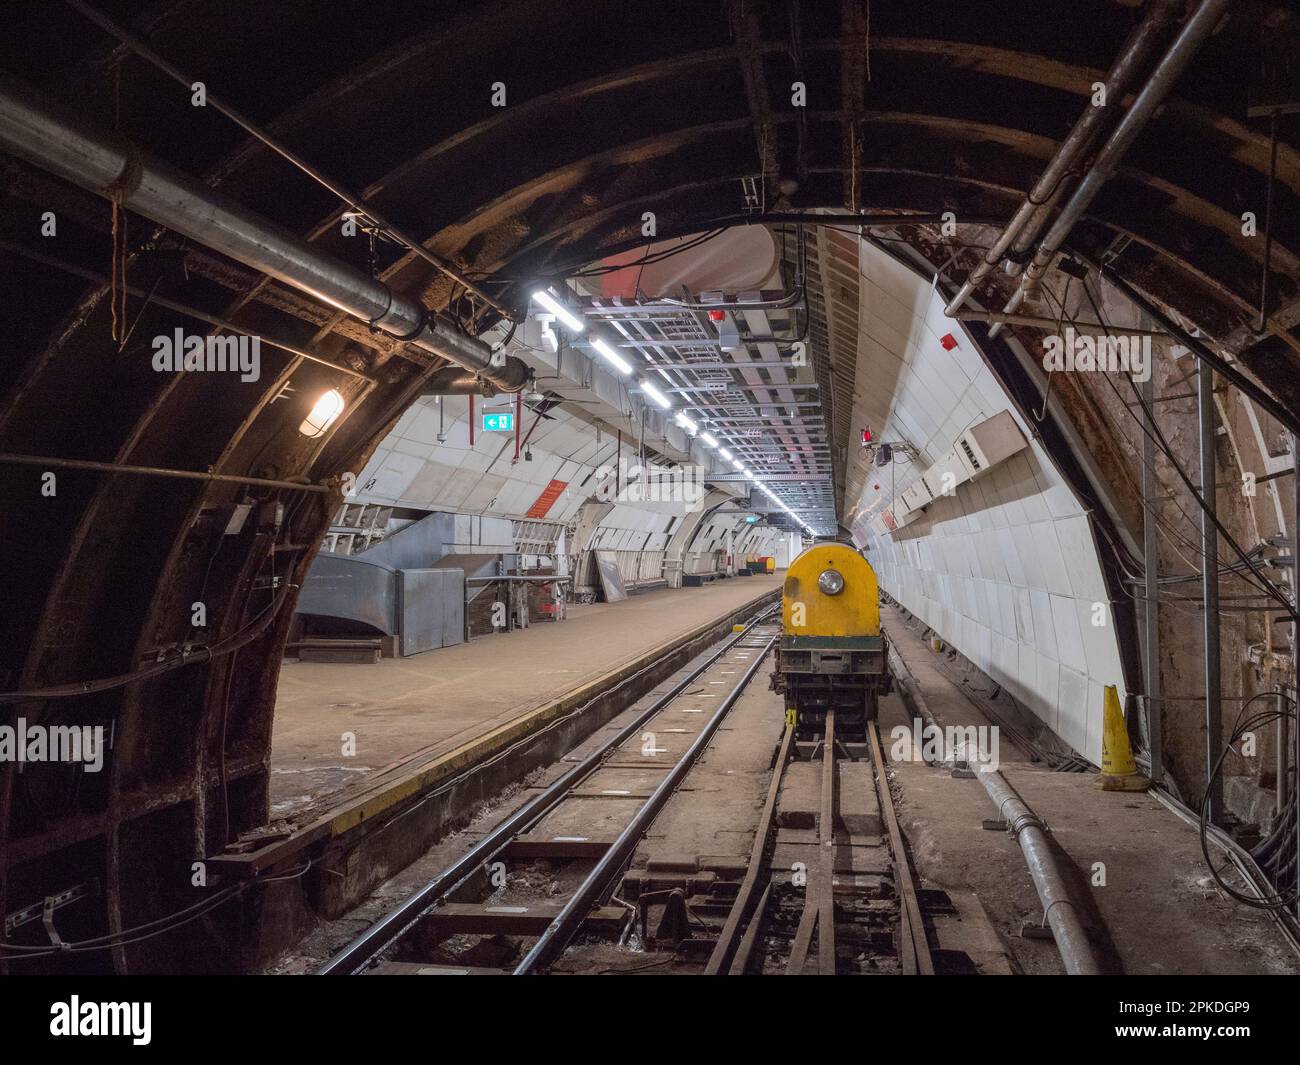 View from tunnel towards Mount Pleasant station platform of Mail Rail, the former Post Office Railway system under the streets of central London, UK. Stock Photo